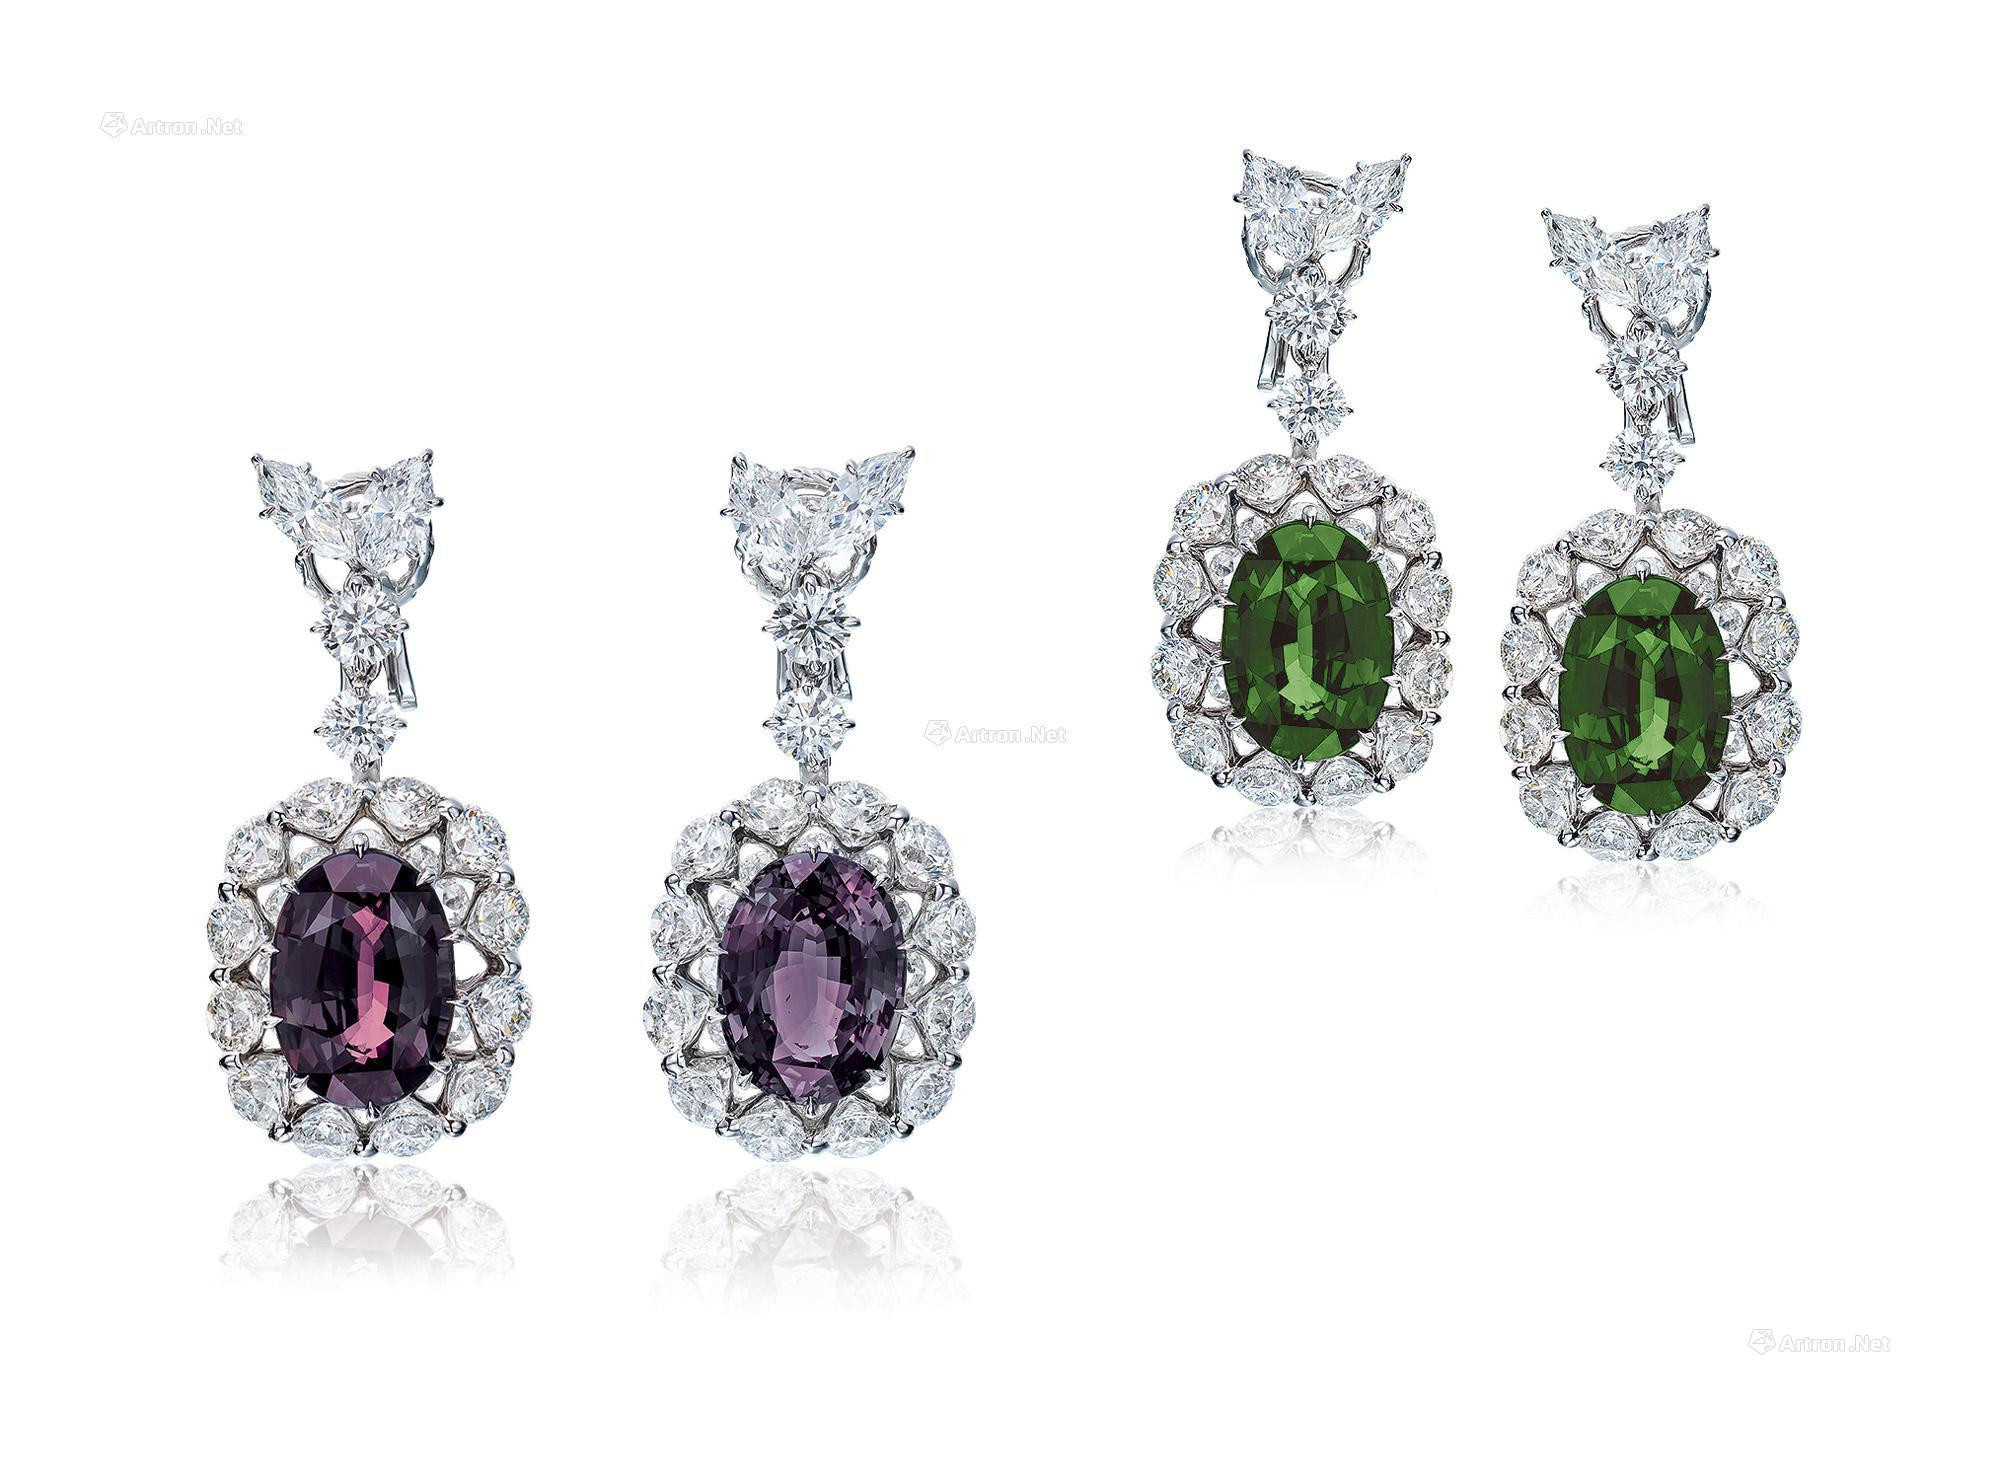 A PAIR OF 10.44 AND 10.10 CARAT ALEXANDRITE AND DIAMOND EAR PENDANTS